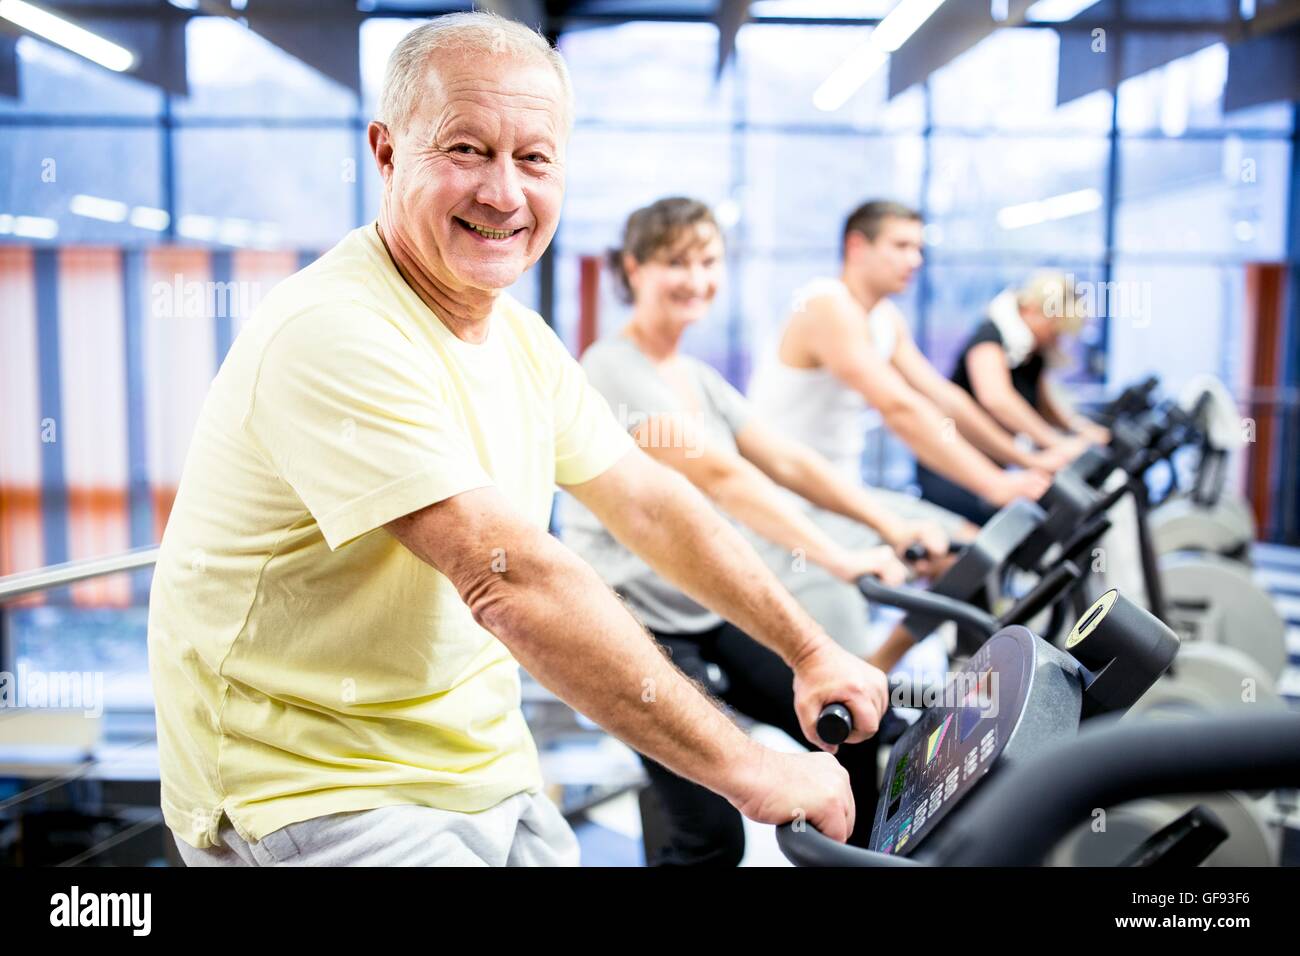 PROPERTY RELEASED. MODEL RELEASED. Portrait senior man exercising on stationary bicycle in gym. Stock Photo